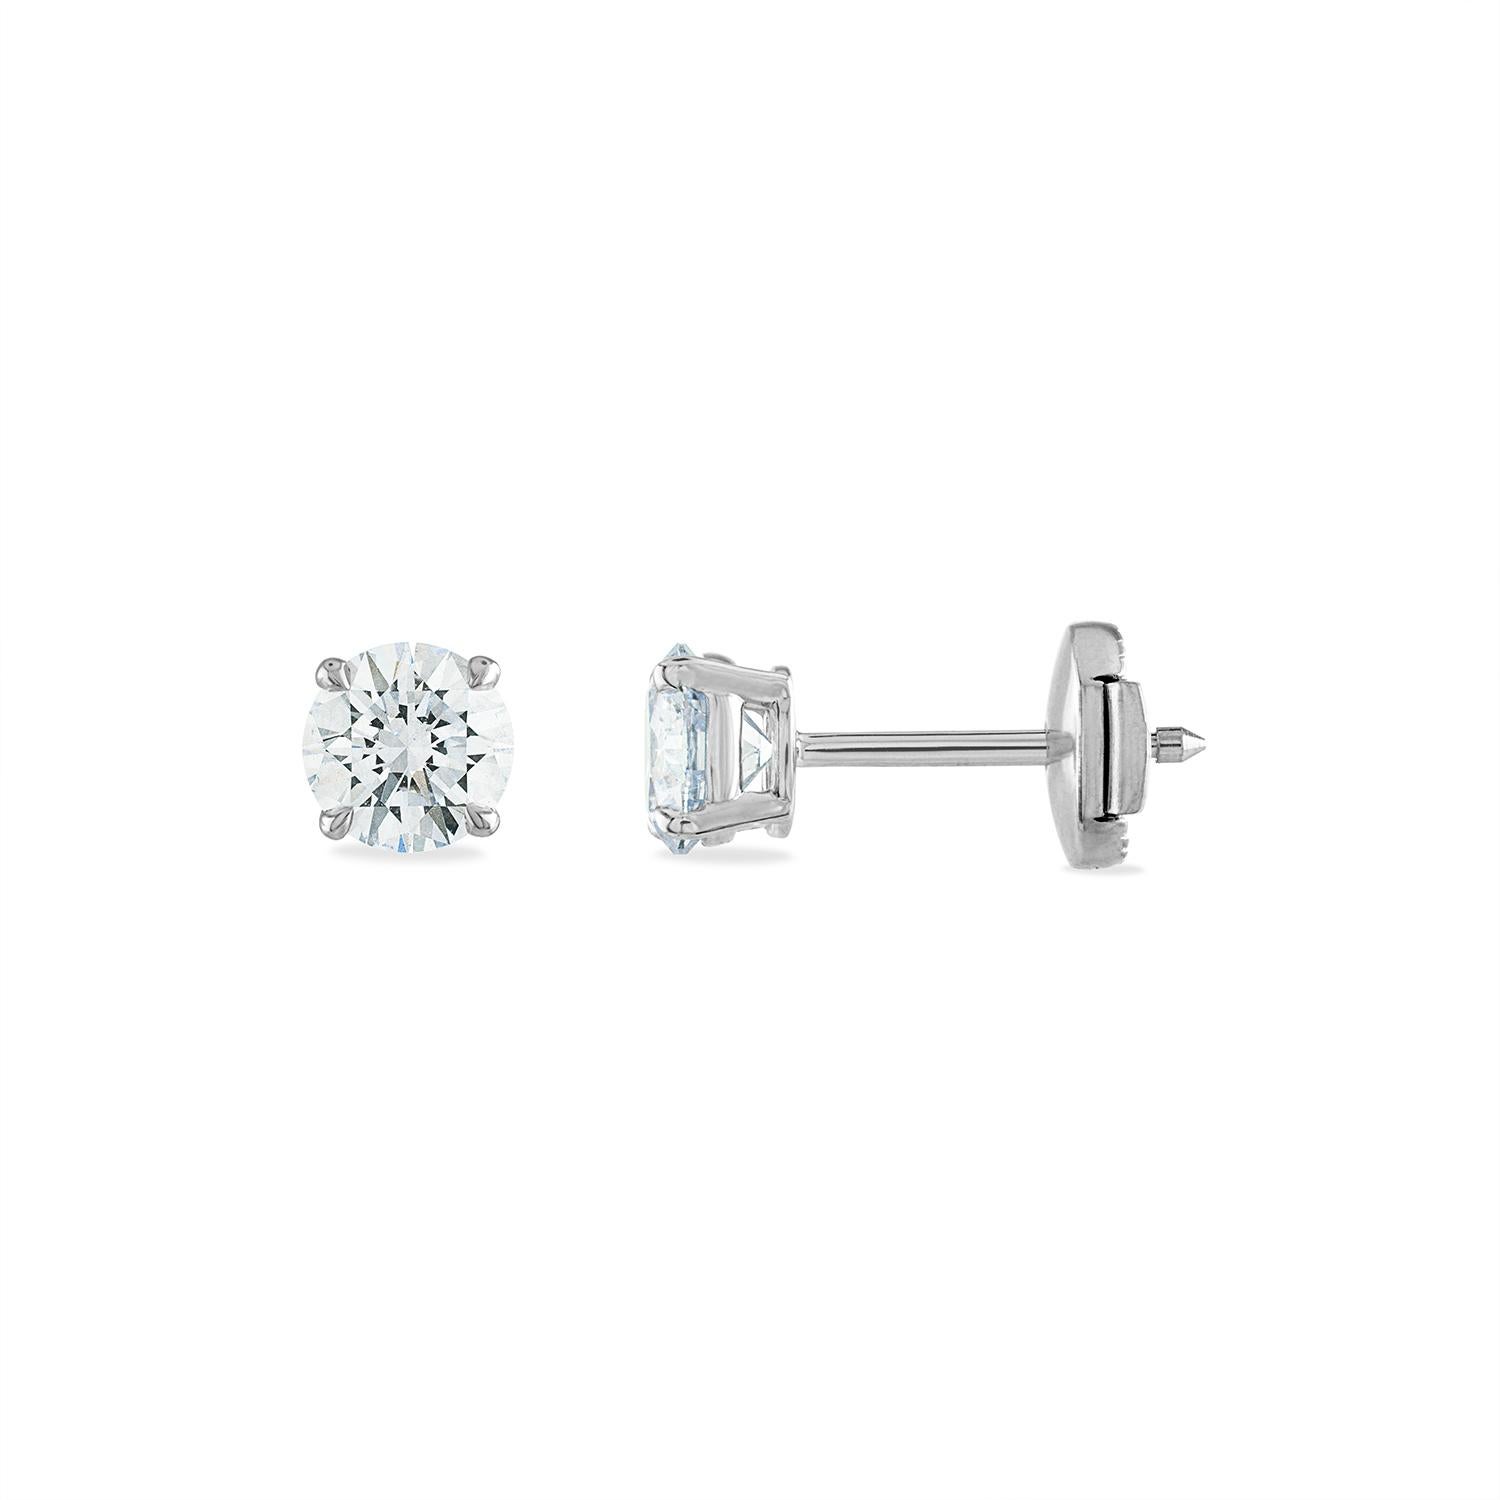 1.00 Ct Total weight Diamond stud earrings.
Both diamonds are GIA Certified, I color, SI2 Clarity. 
Both stones are rated Excellent Cut, Excellent Polish, and Excellent Symmetry - the highest possible score within the GIA grading evaluation. 

Set